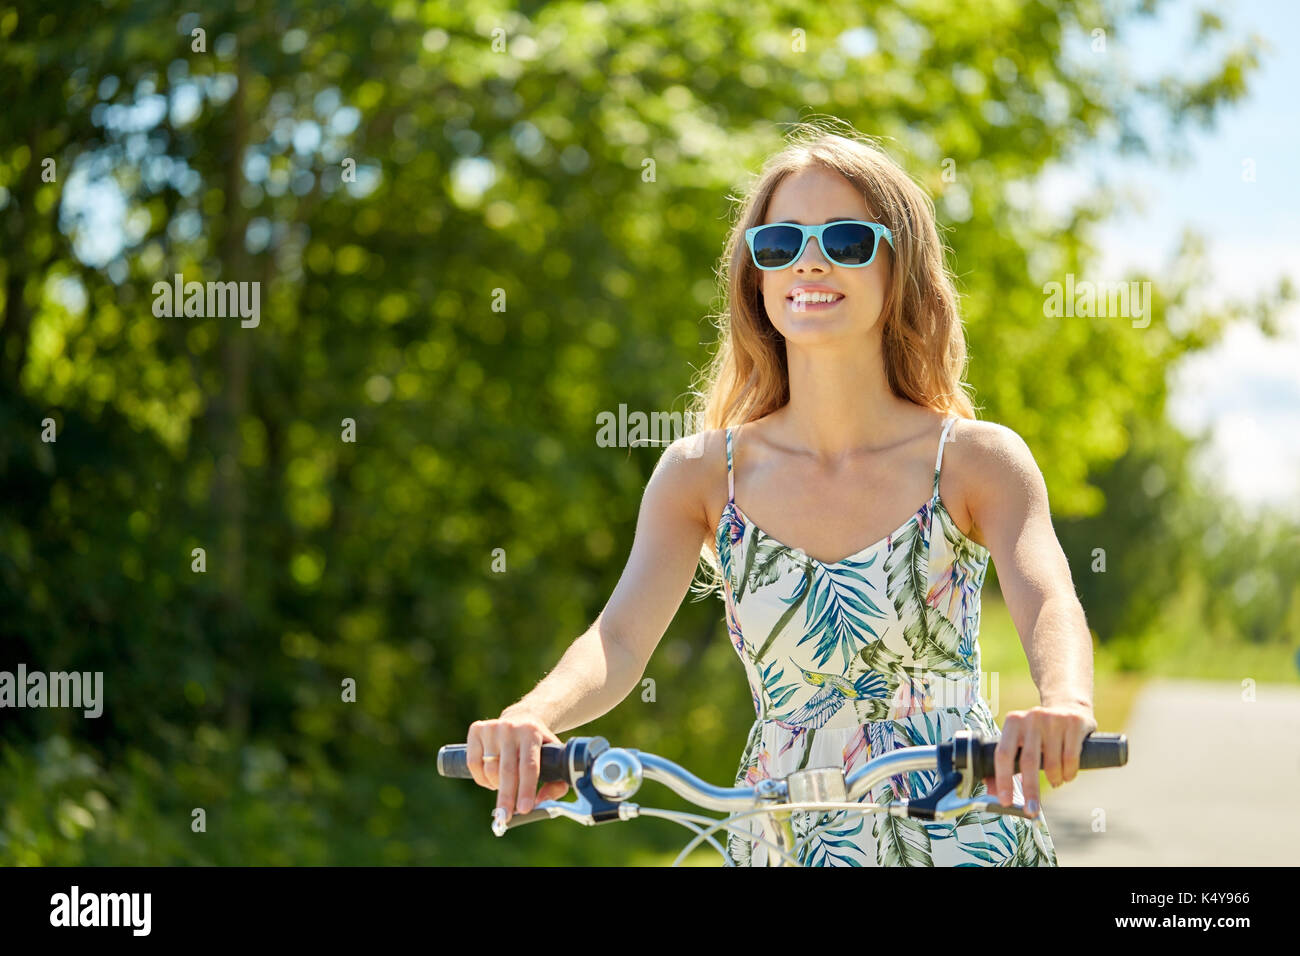 happy smiling young woman riding bicycle in summer Stock Photo